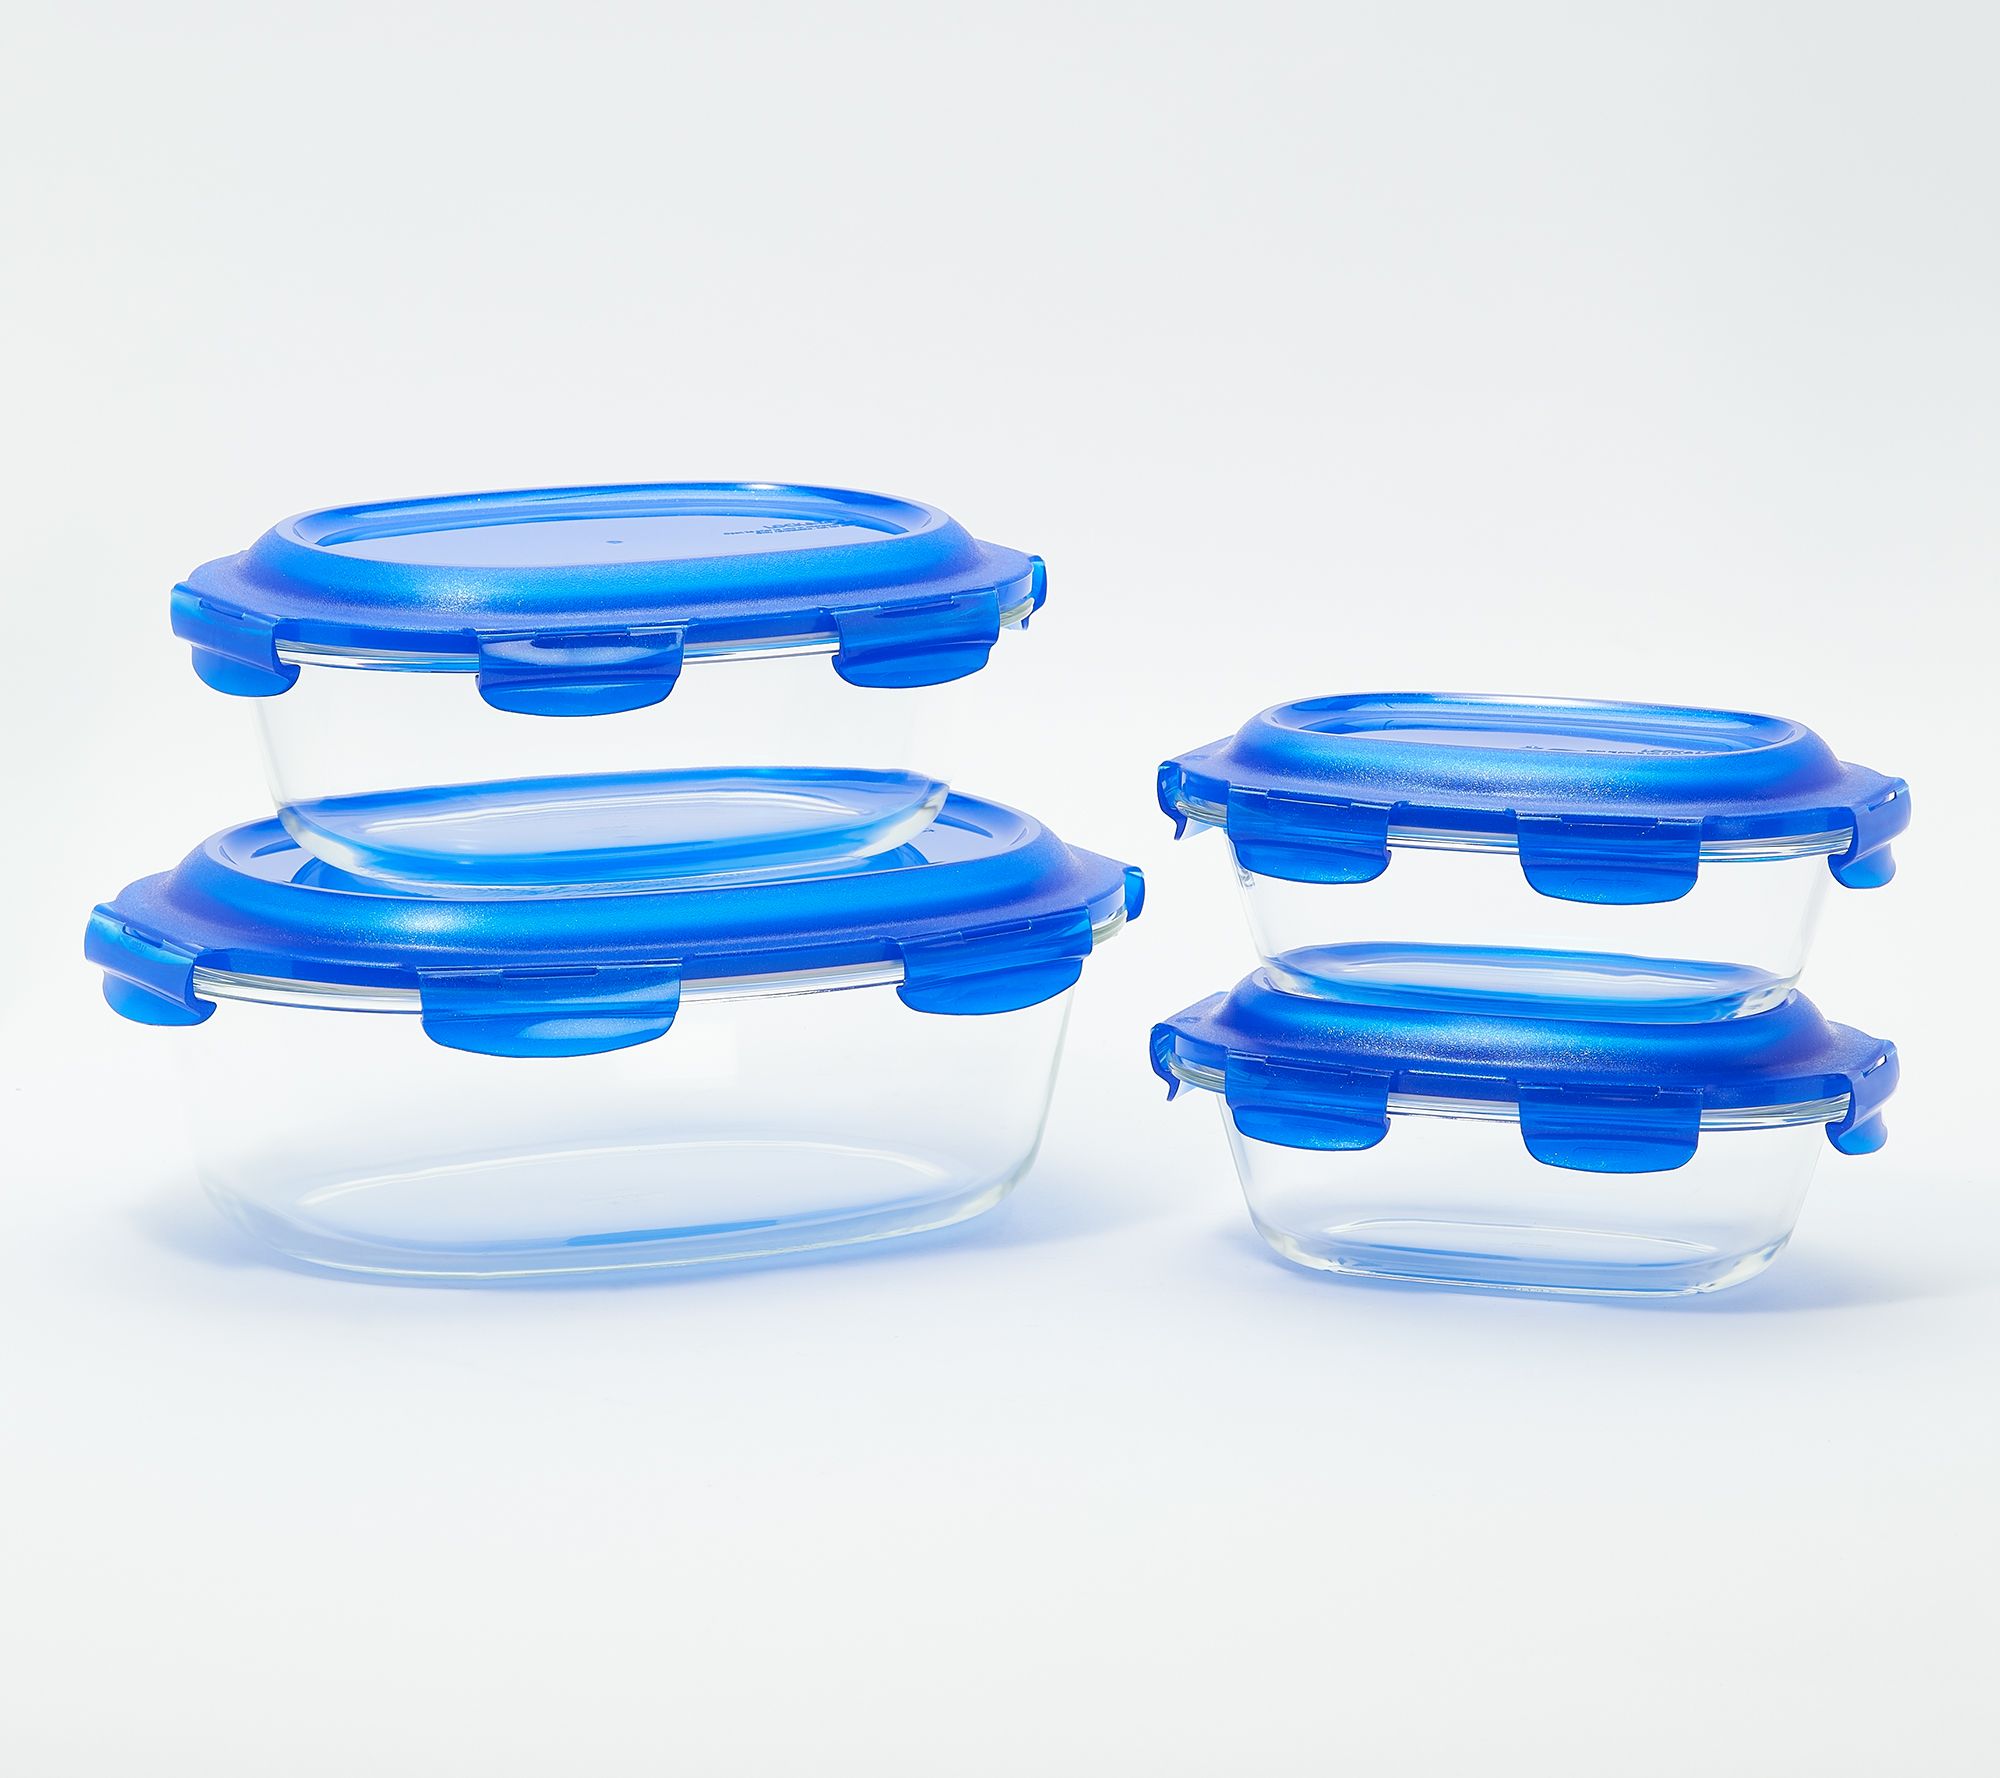 Lock 'n Lock 4-Piece Glass Container Sets from $22.48 Shipped